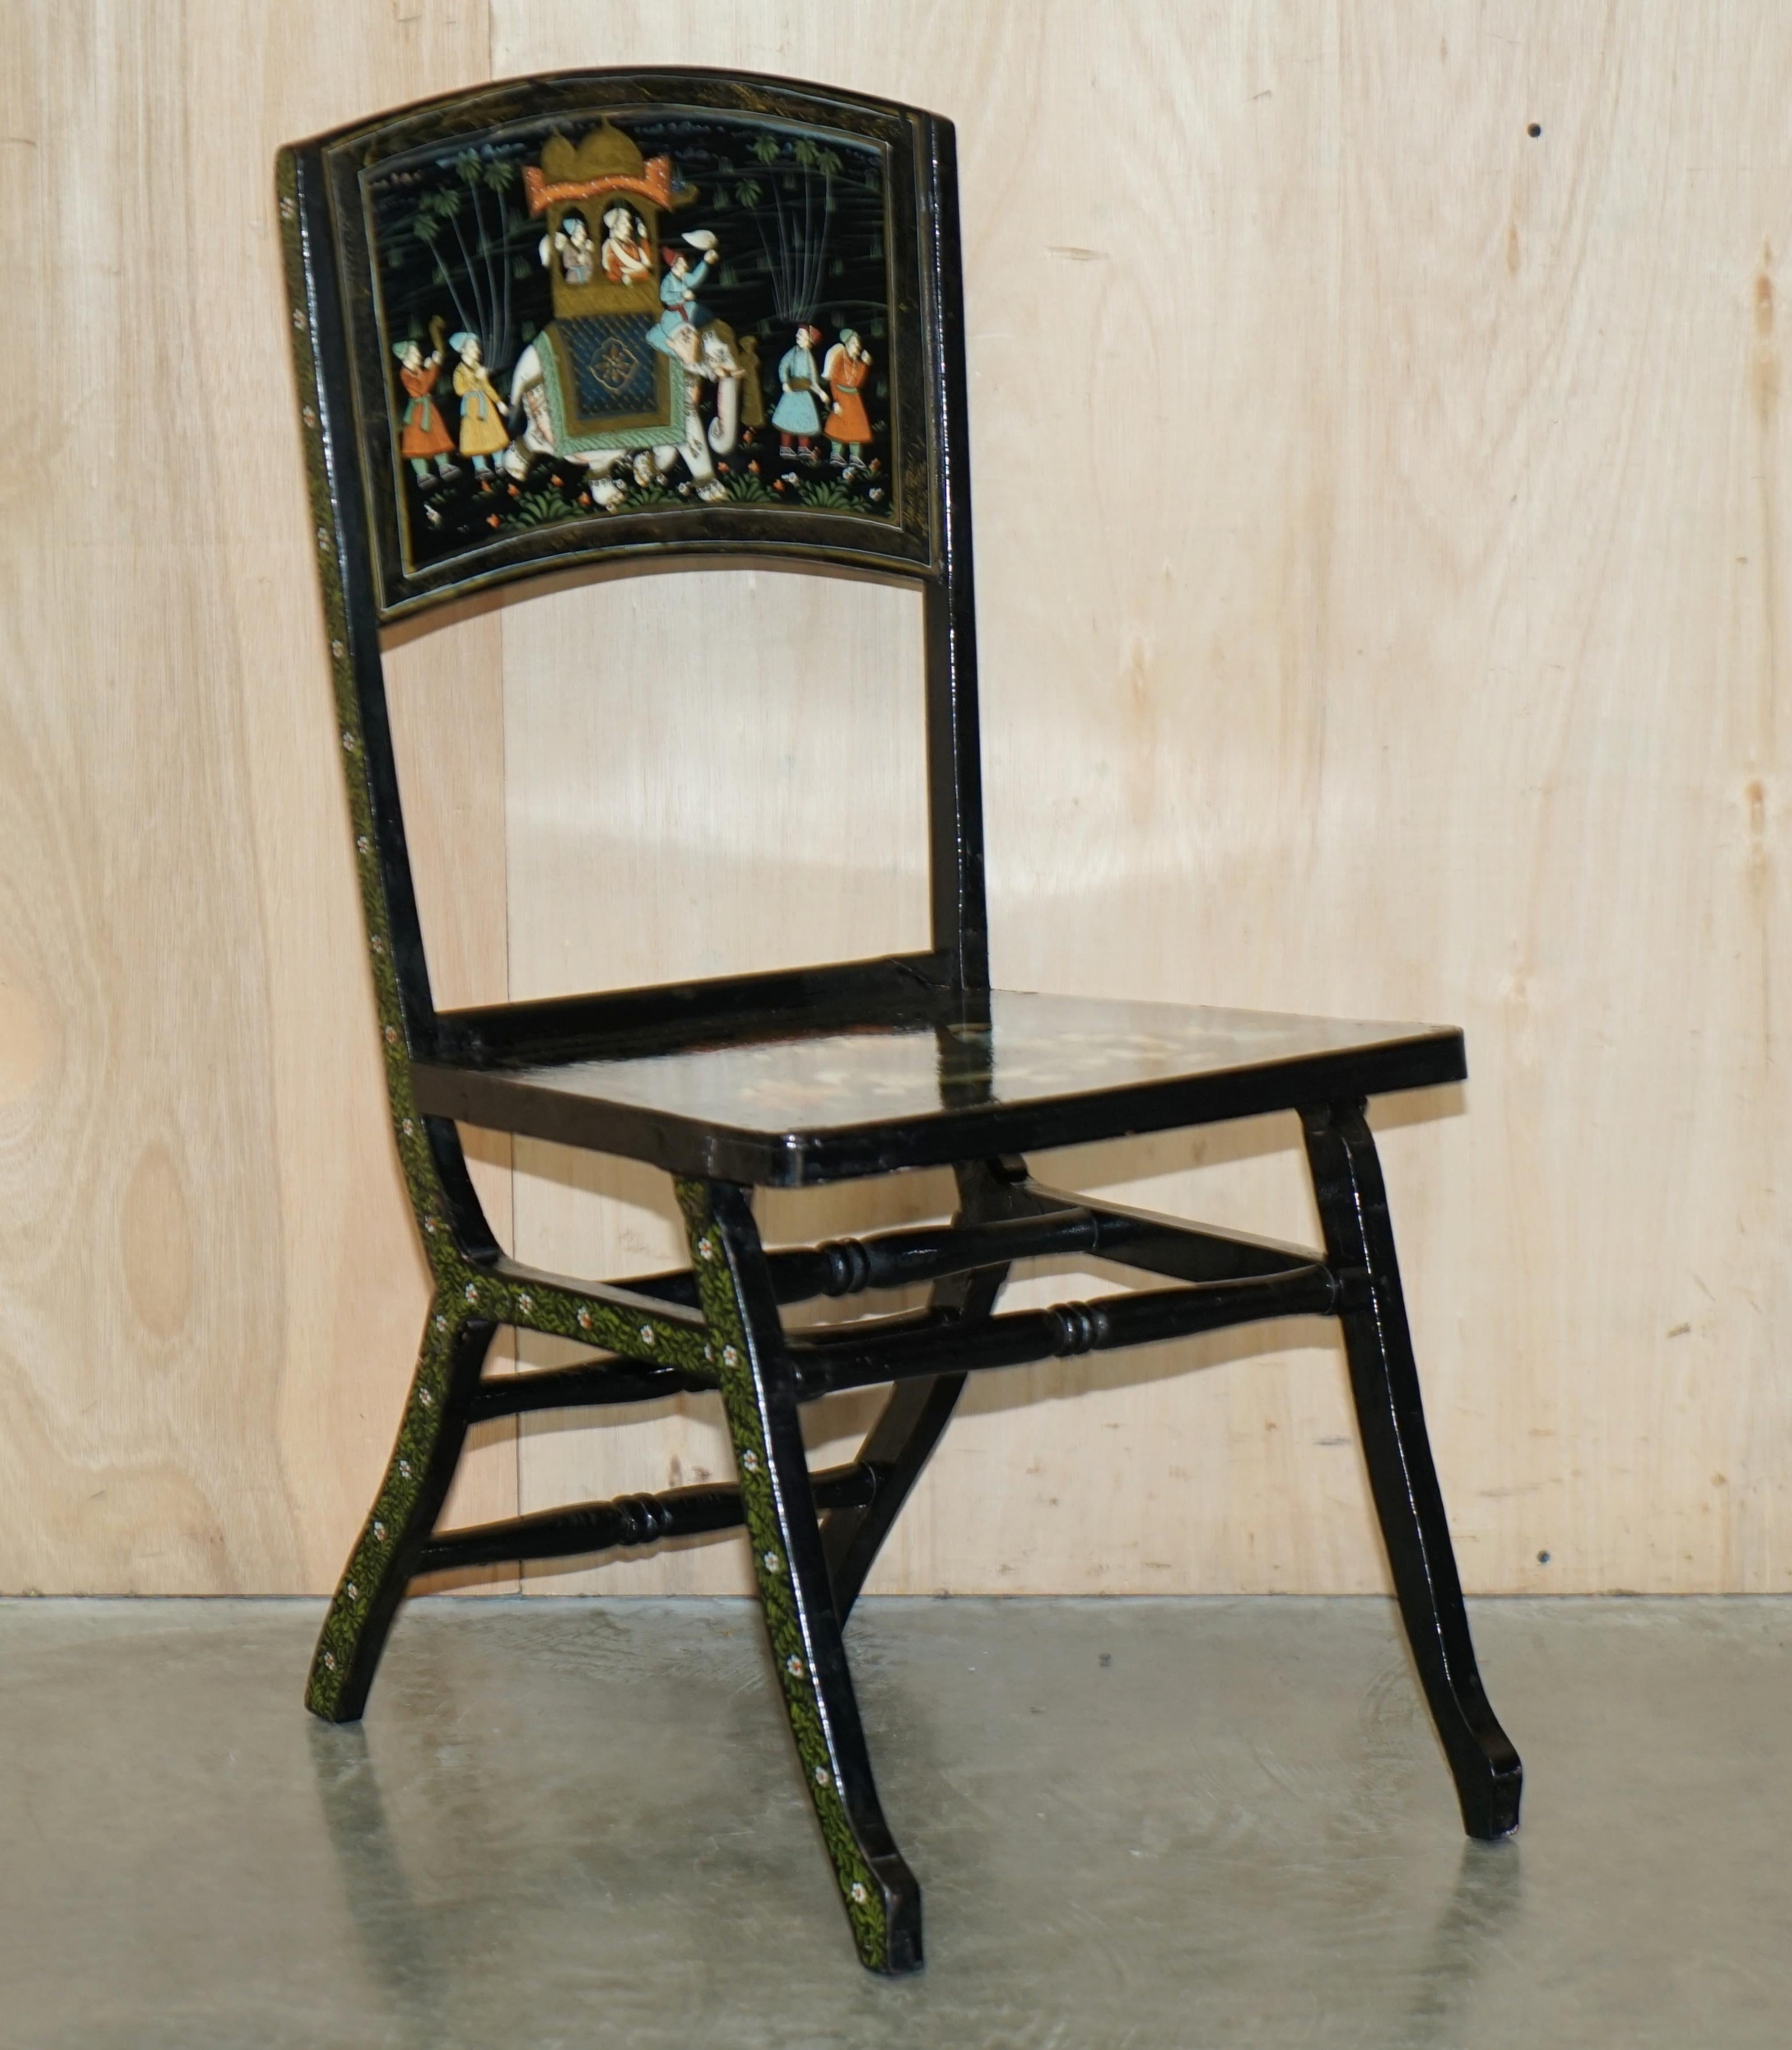 We are delighted to offer for sale this super rare pair of Chinese Chinoiserie Military Campaign folding chairs which have Indian Elephant decoration.

A very good looking and decorative pair of antique Chinese armchairs, these were made for the